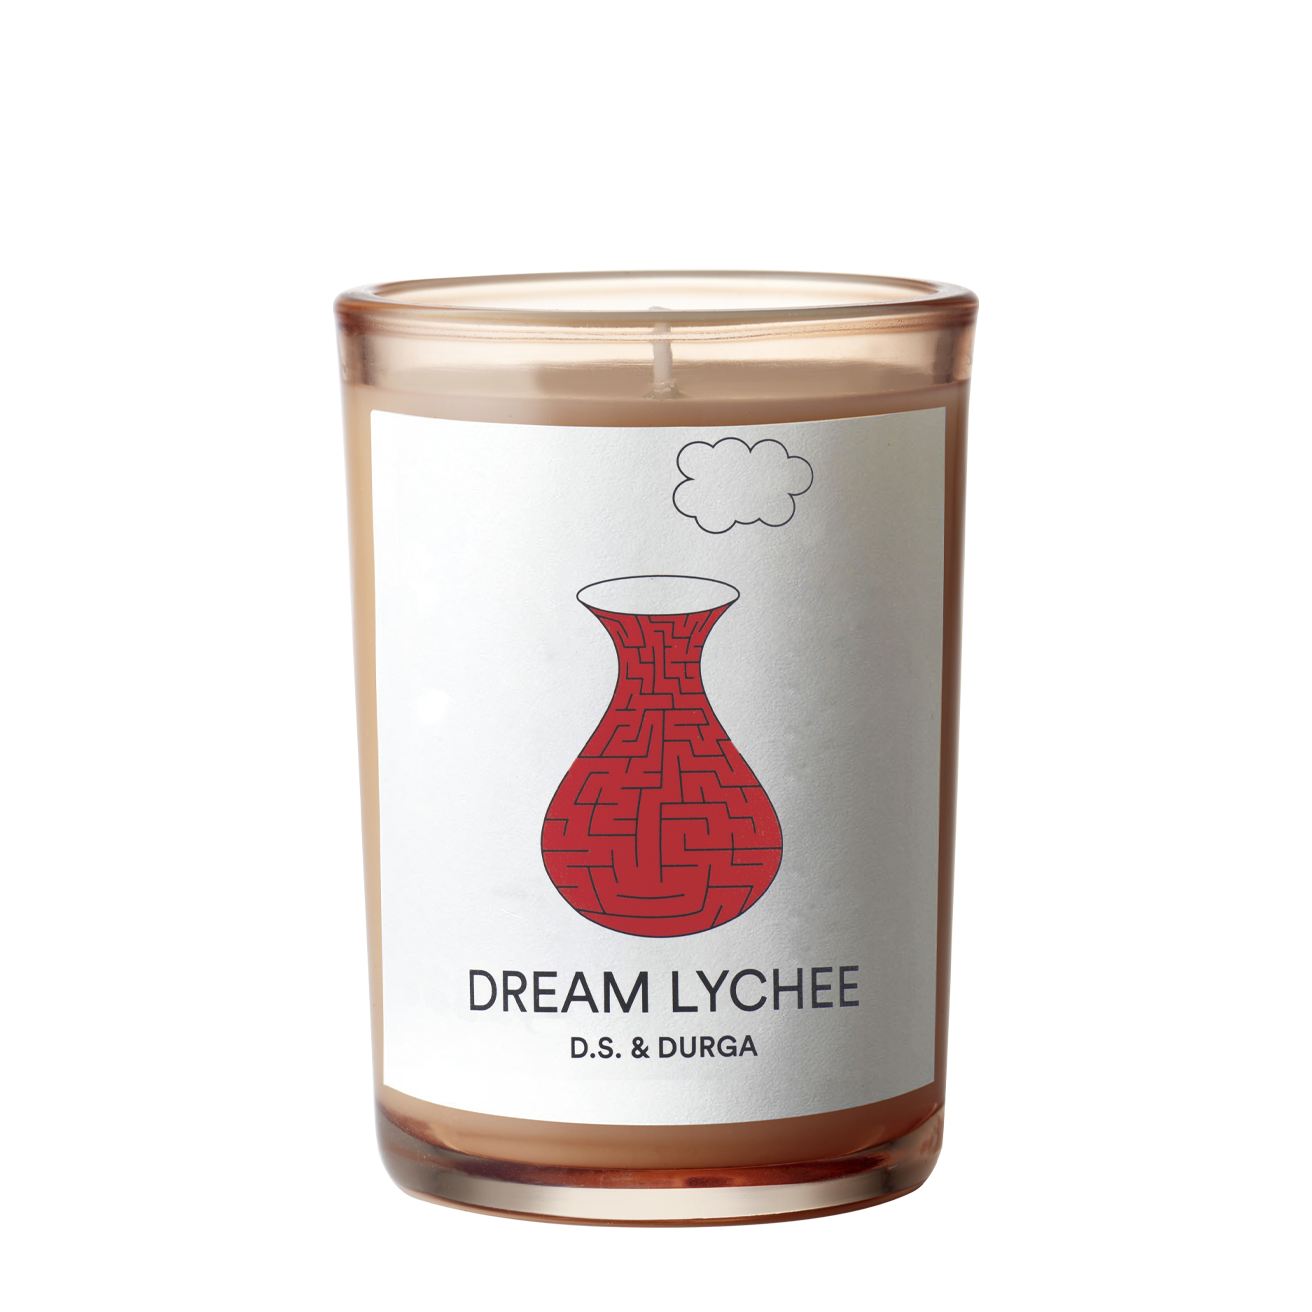 D.S. & Durga Dream Lychee candle